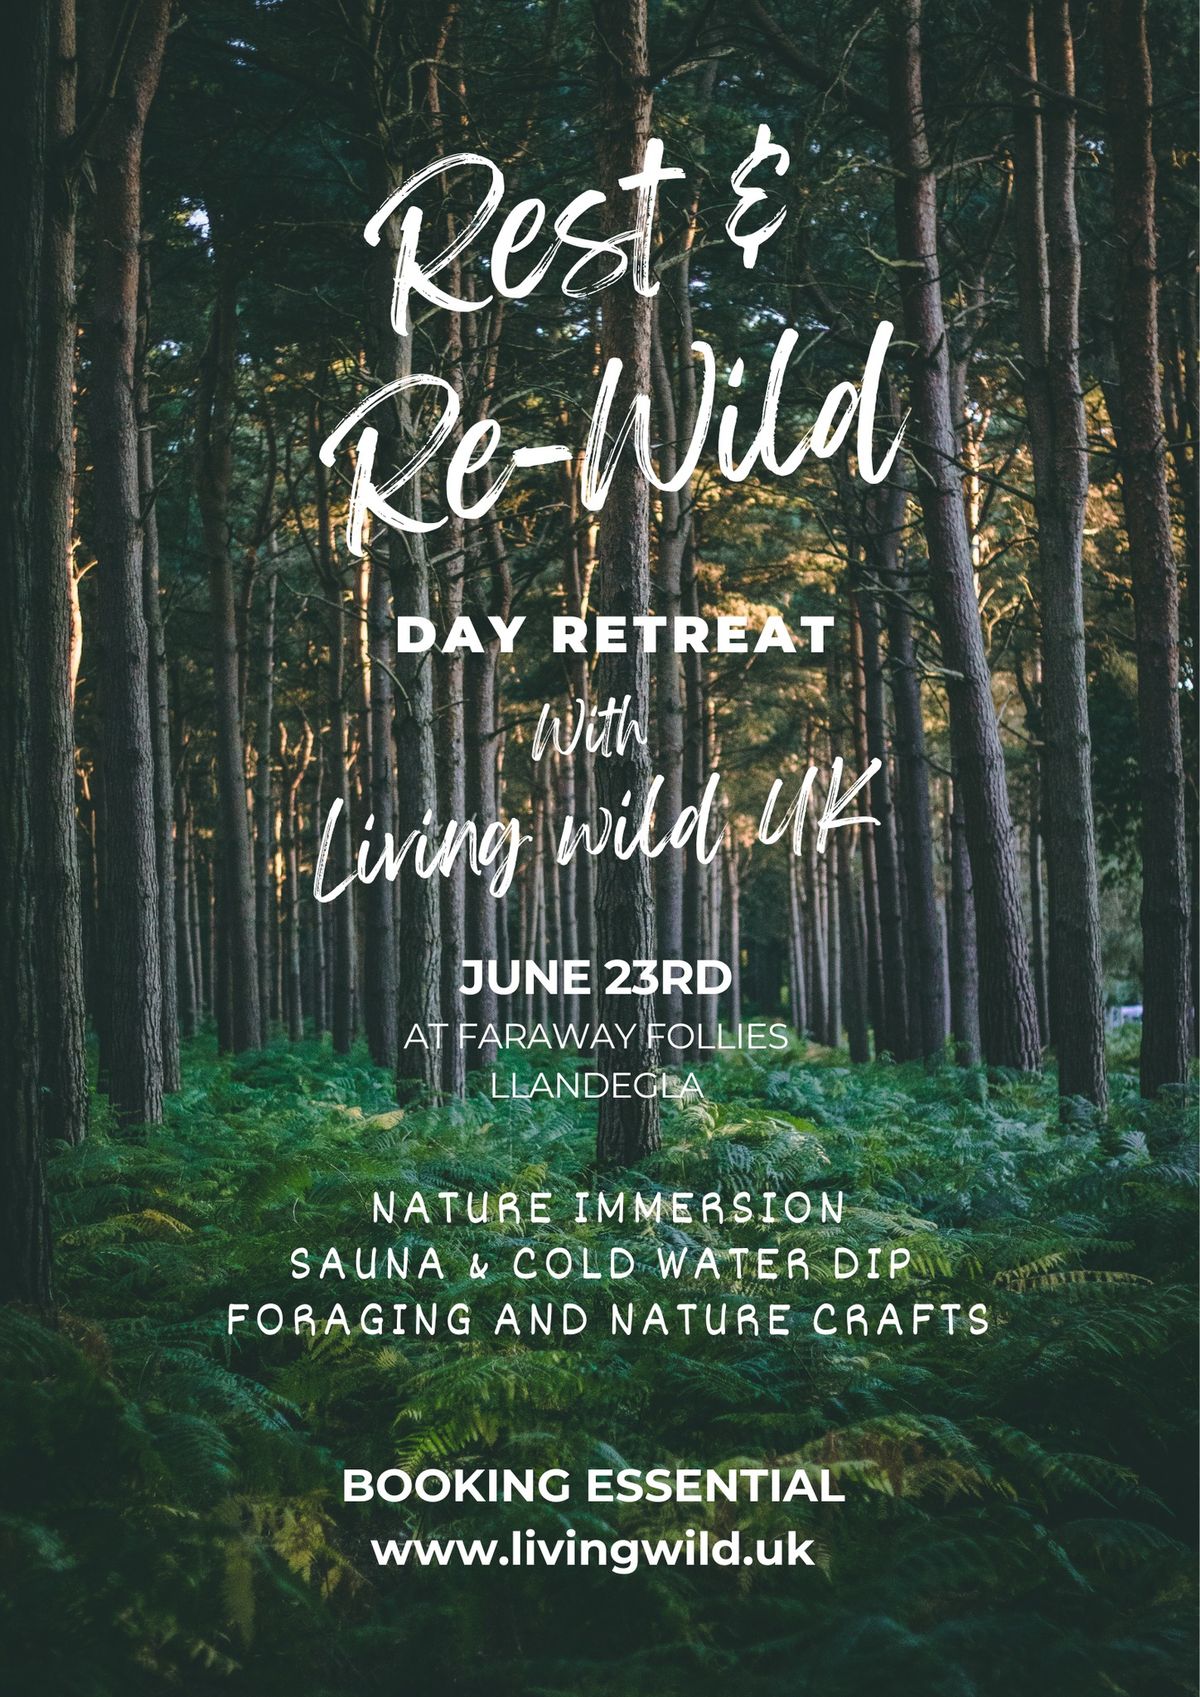 Rest and Re-wild Day Retreat 